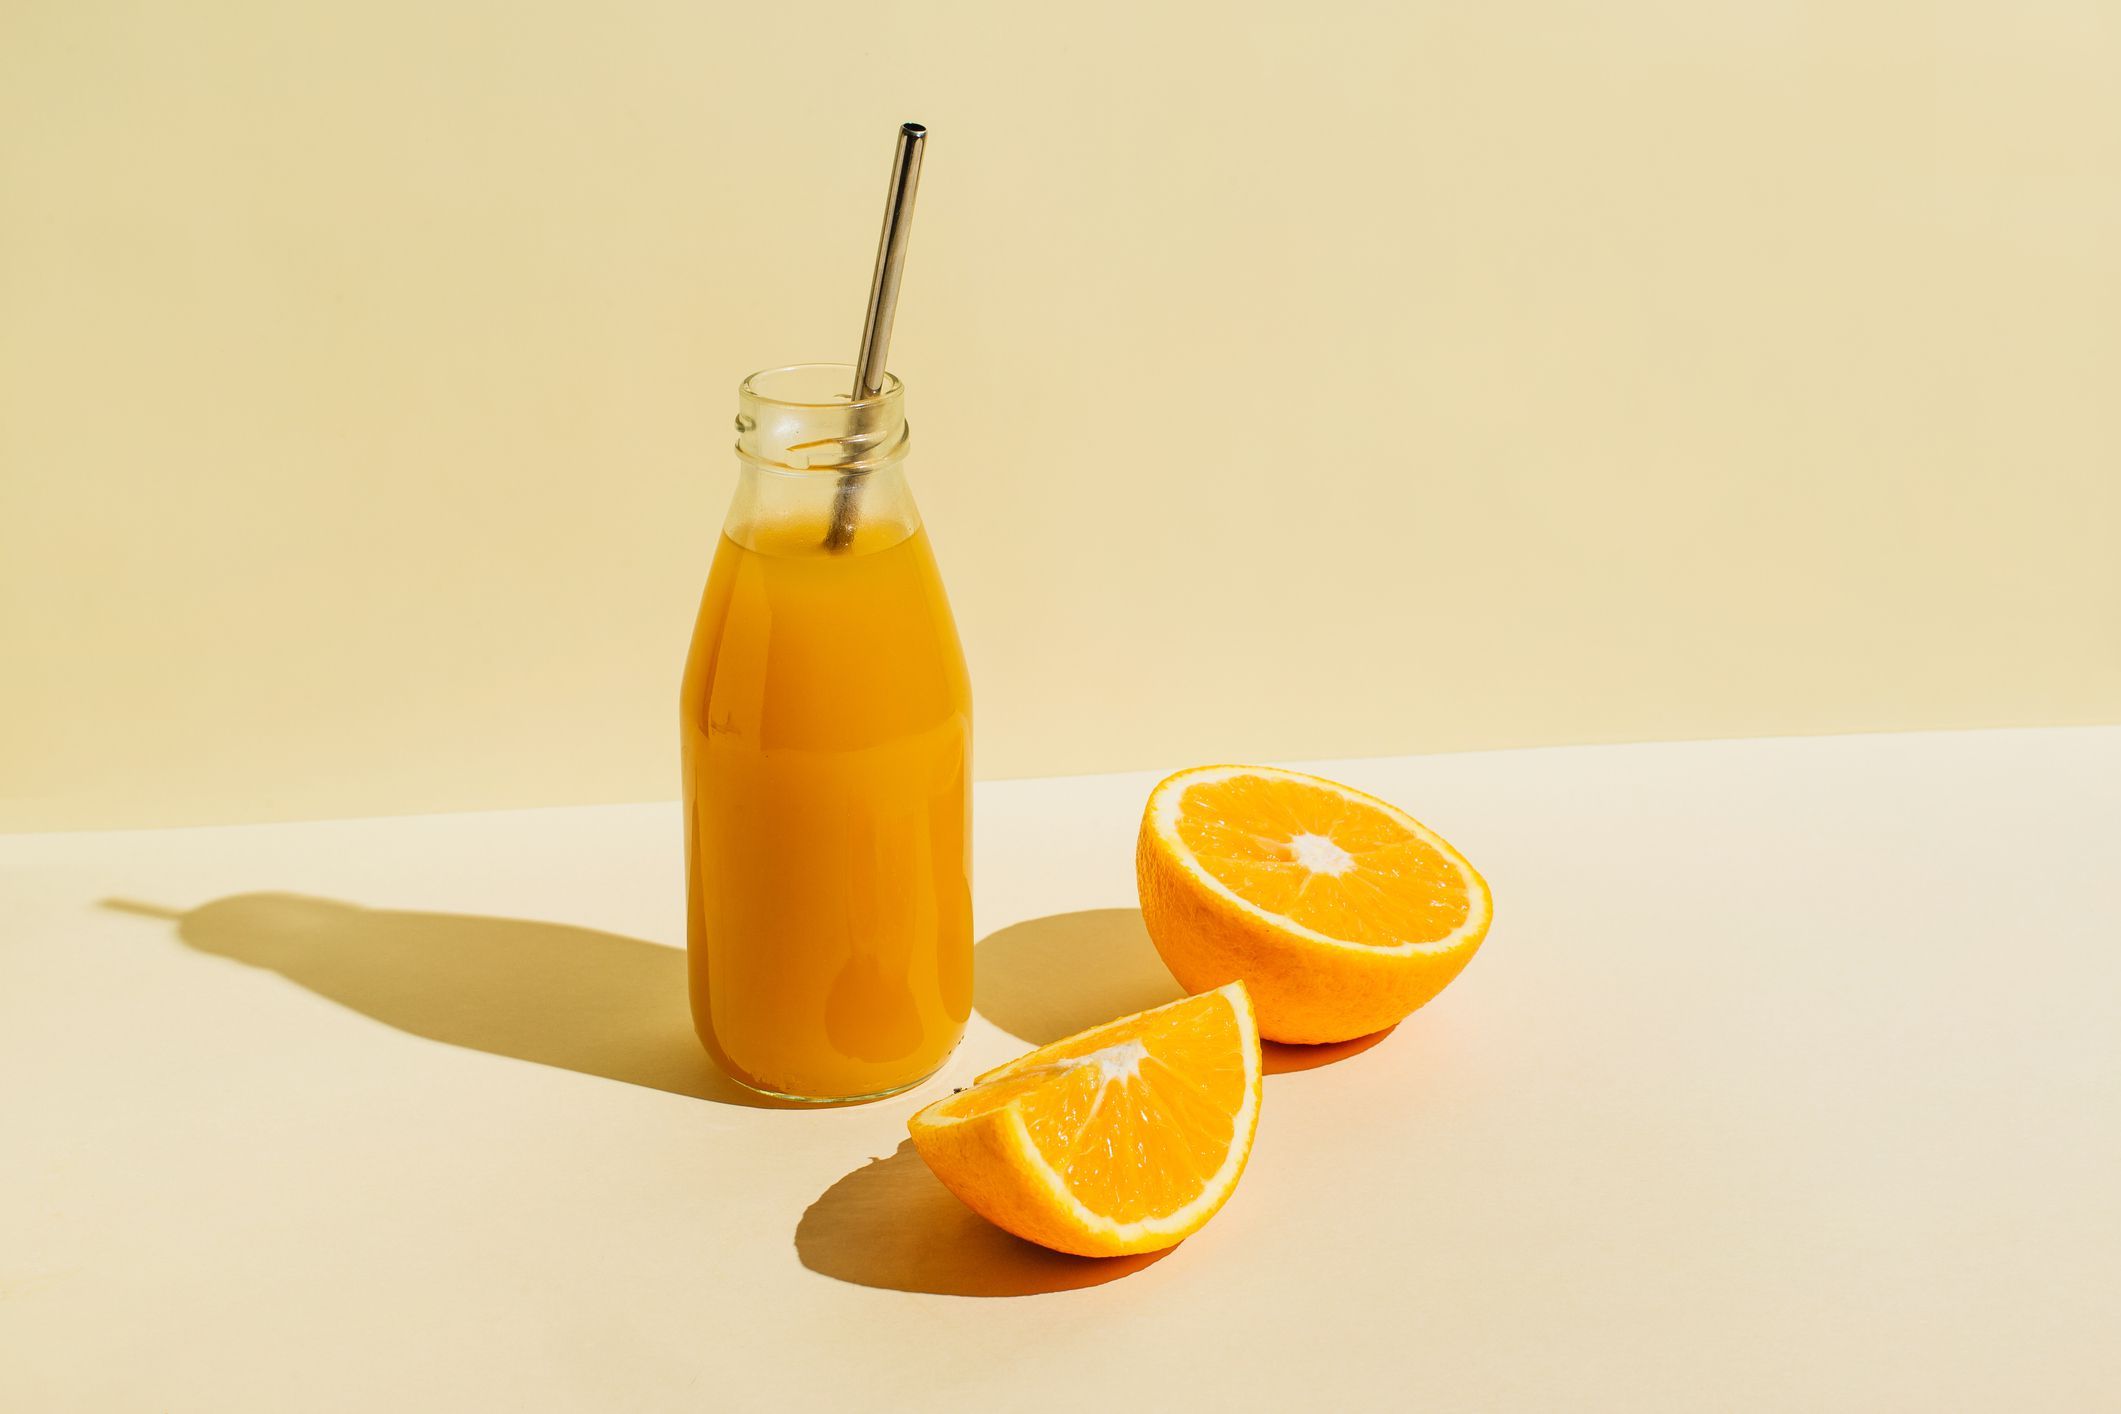 How Much Sugar Is In A Glass Of Orange Juice?